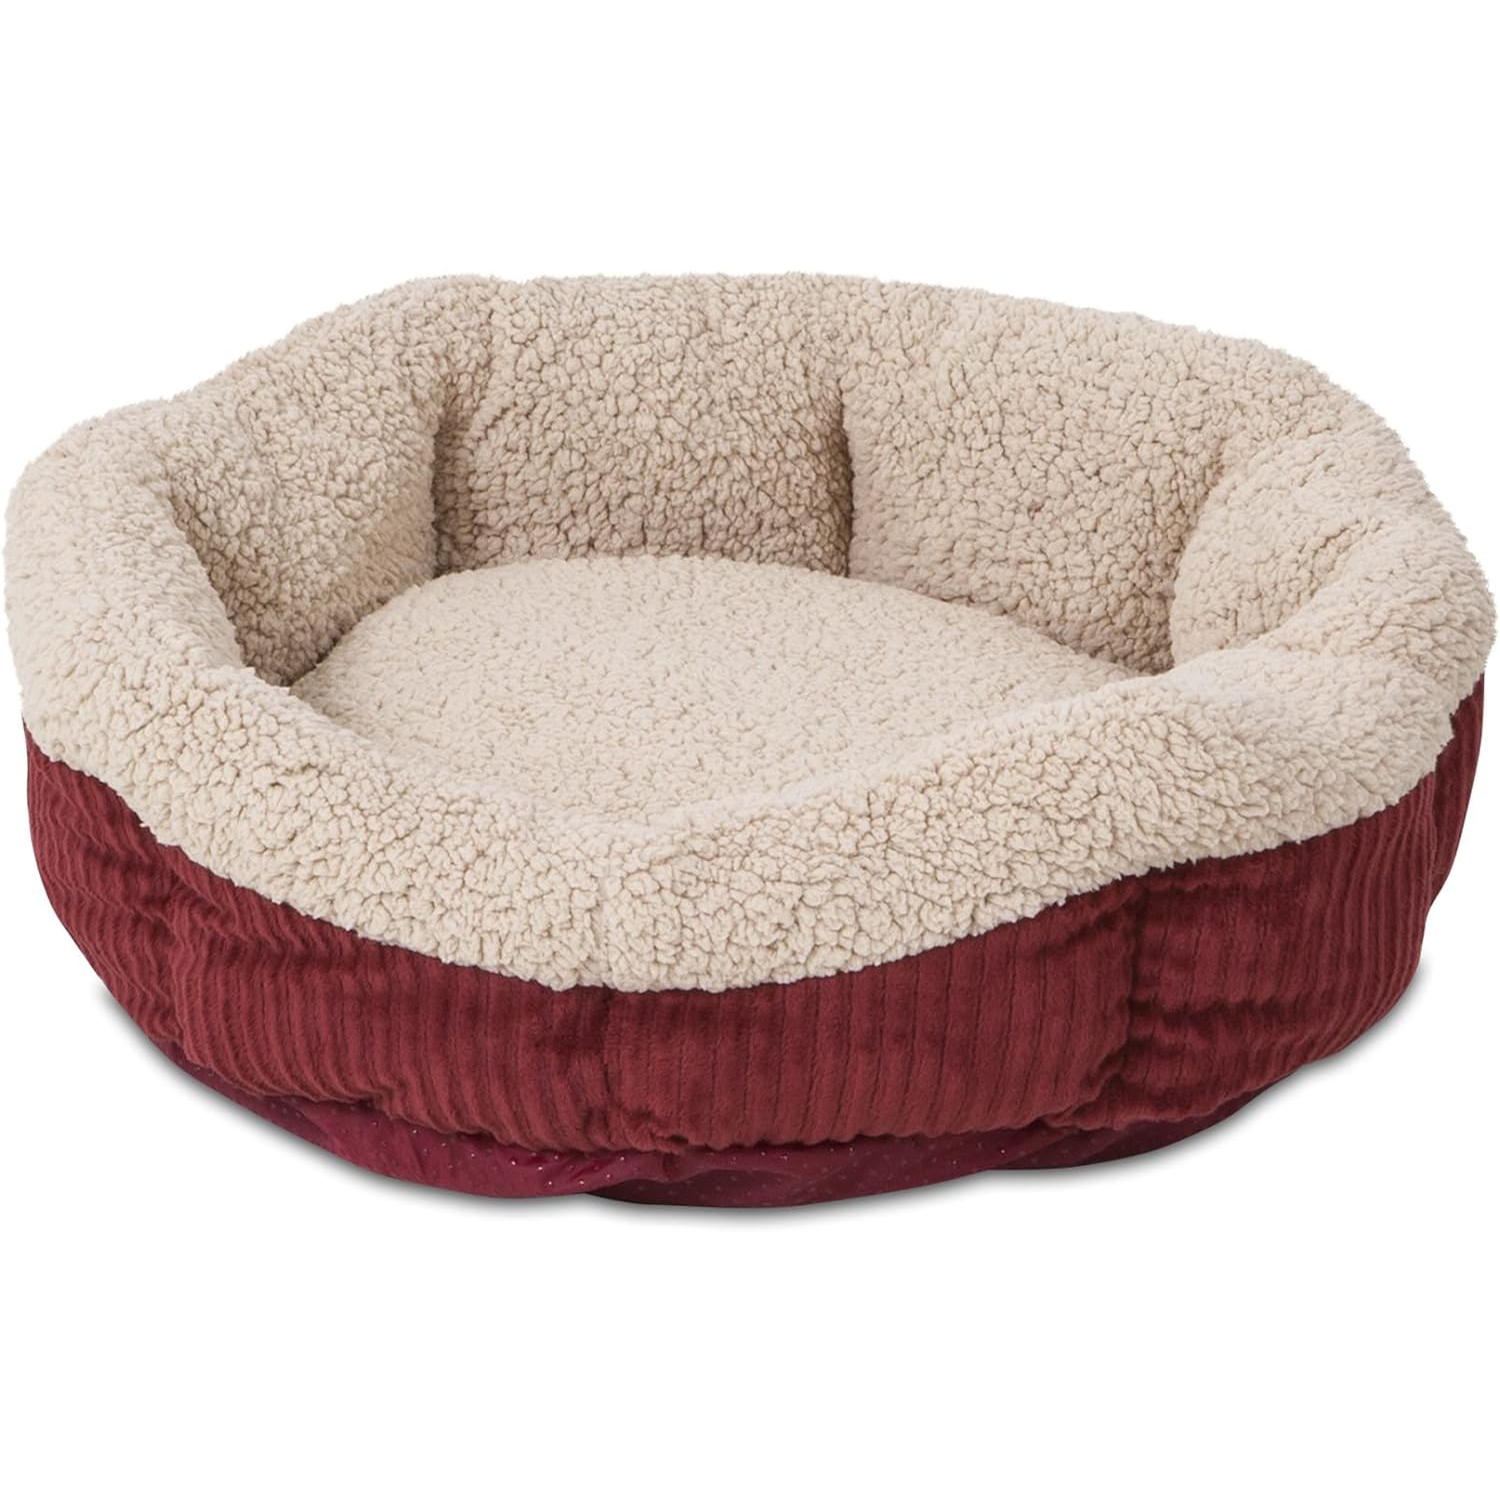 Petmate Aspen Pet Self Warming Round Bed, 19.5 Inches, Barn Red and Cream New